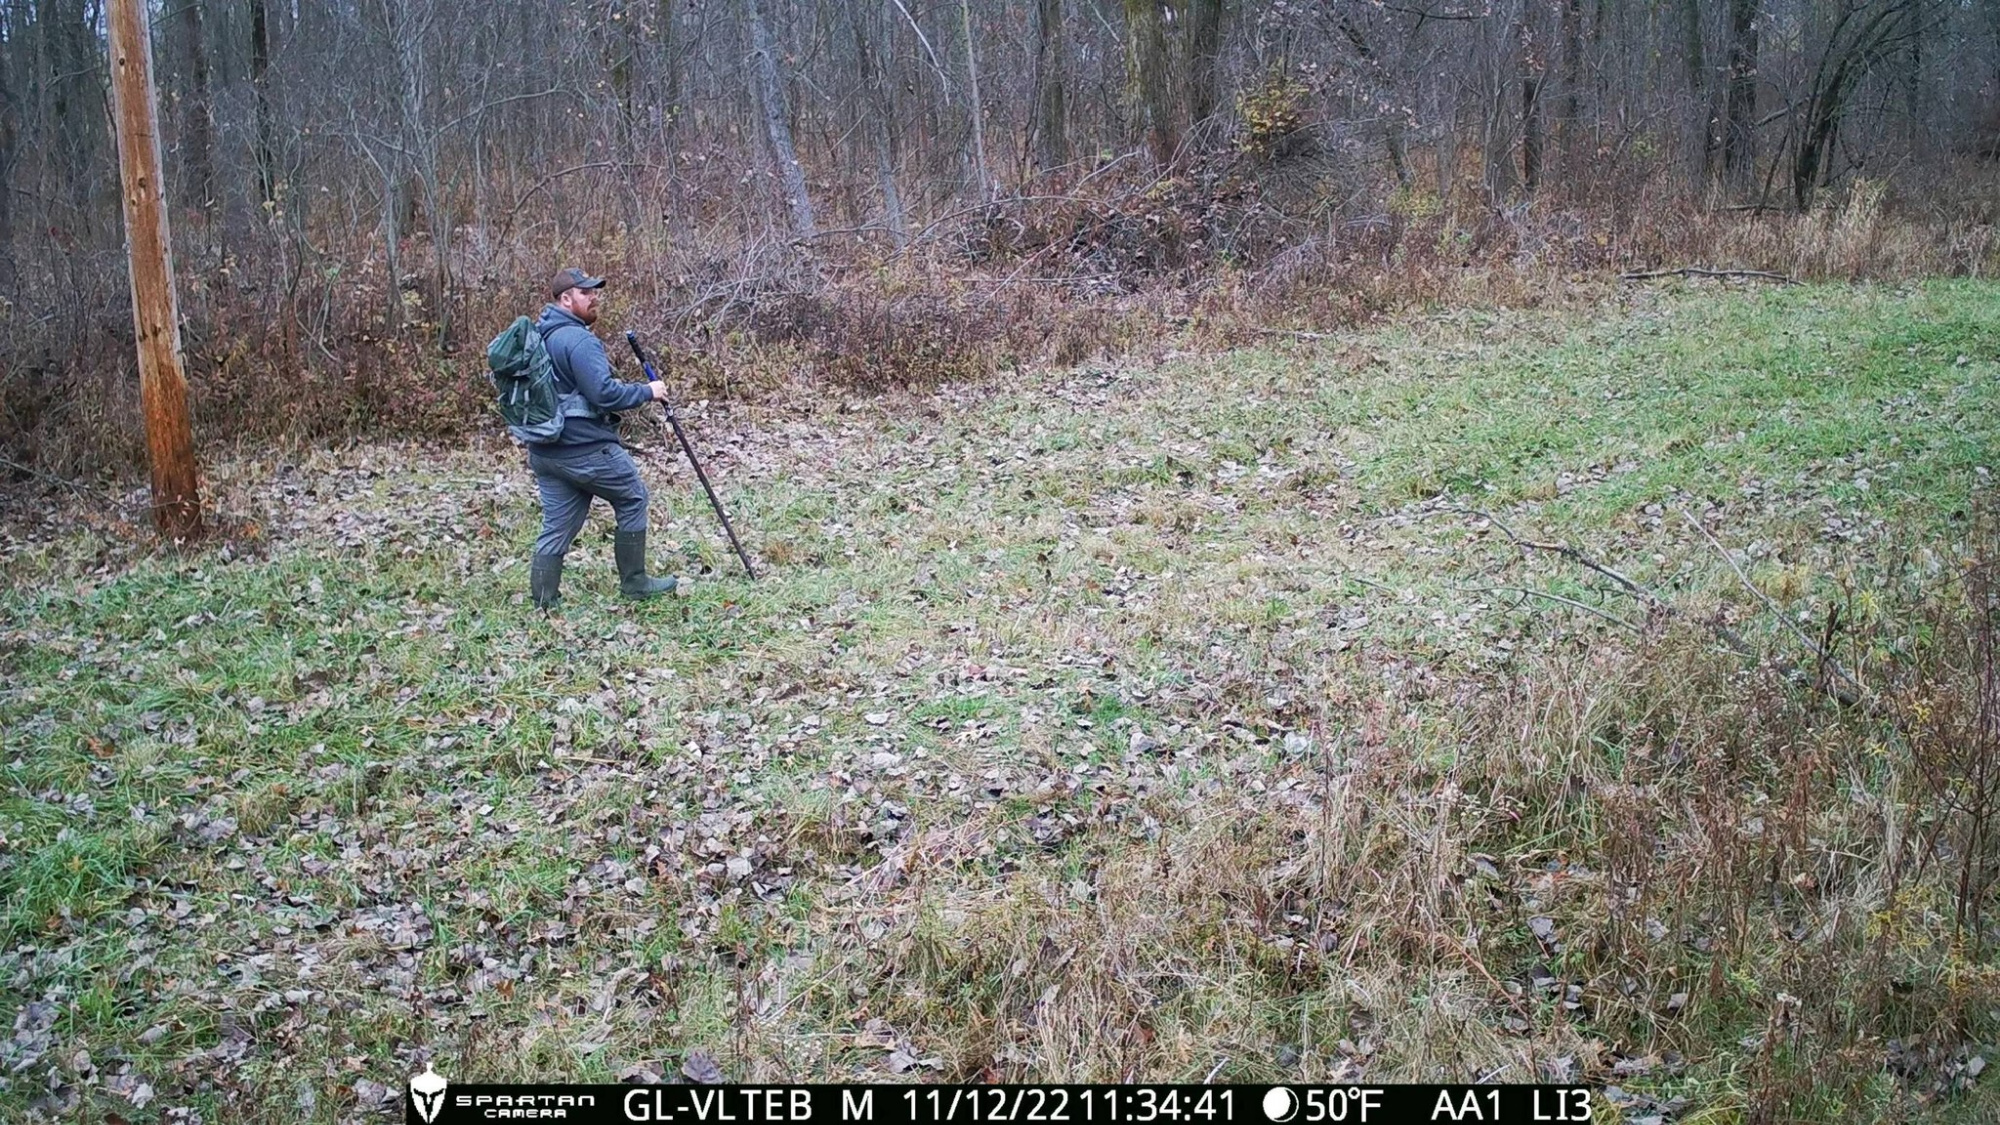 New York poacher Kevin Butler was caught on trail camera.